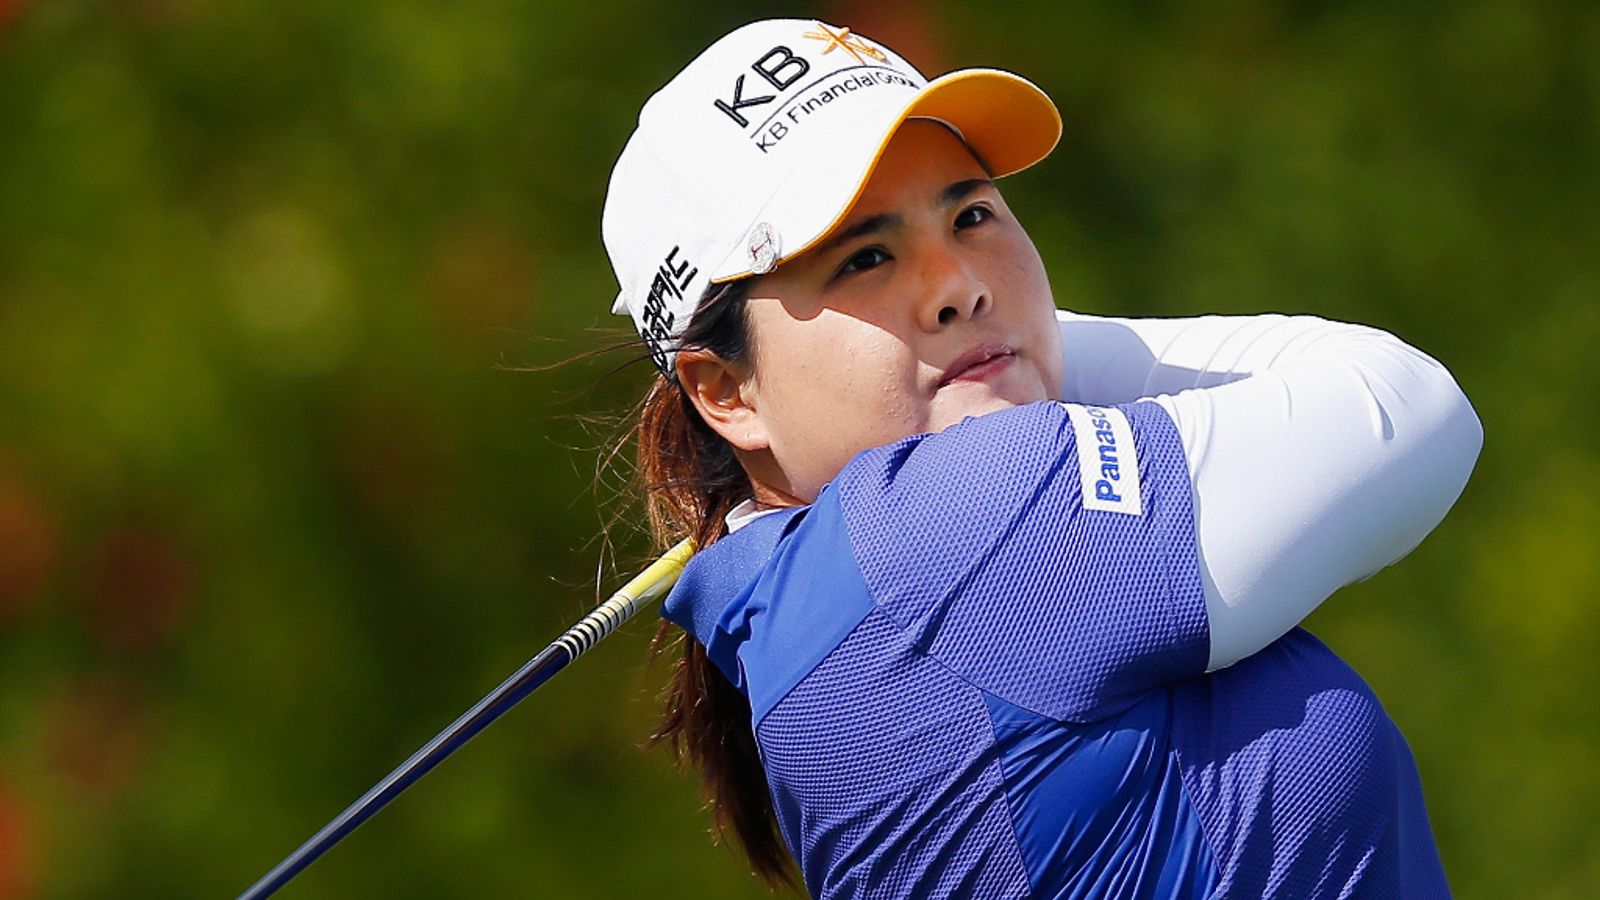 Inbee Park takes lead in HSBC Champions; Lydia Ko two shots back | Golf ...